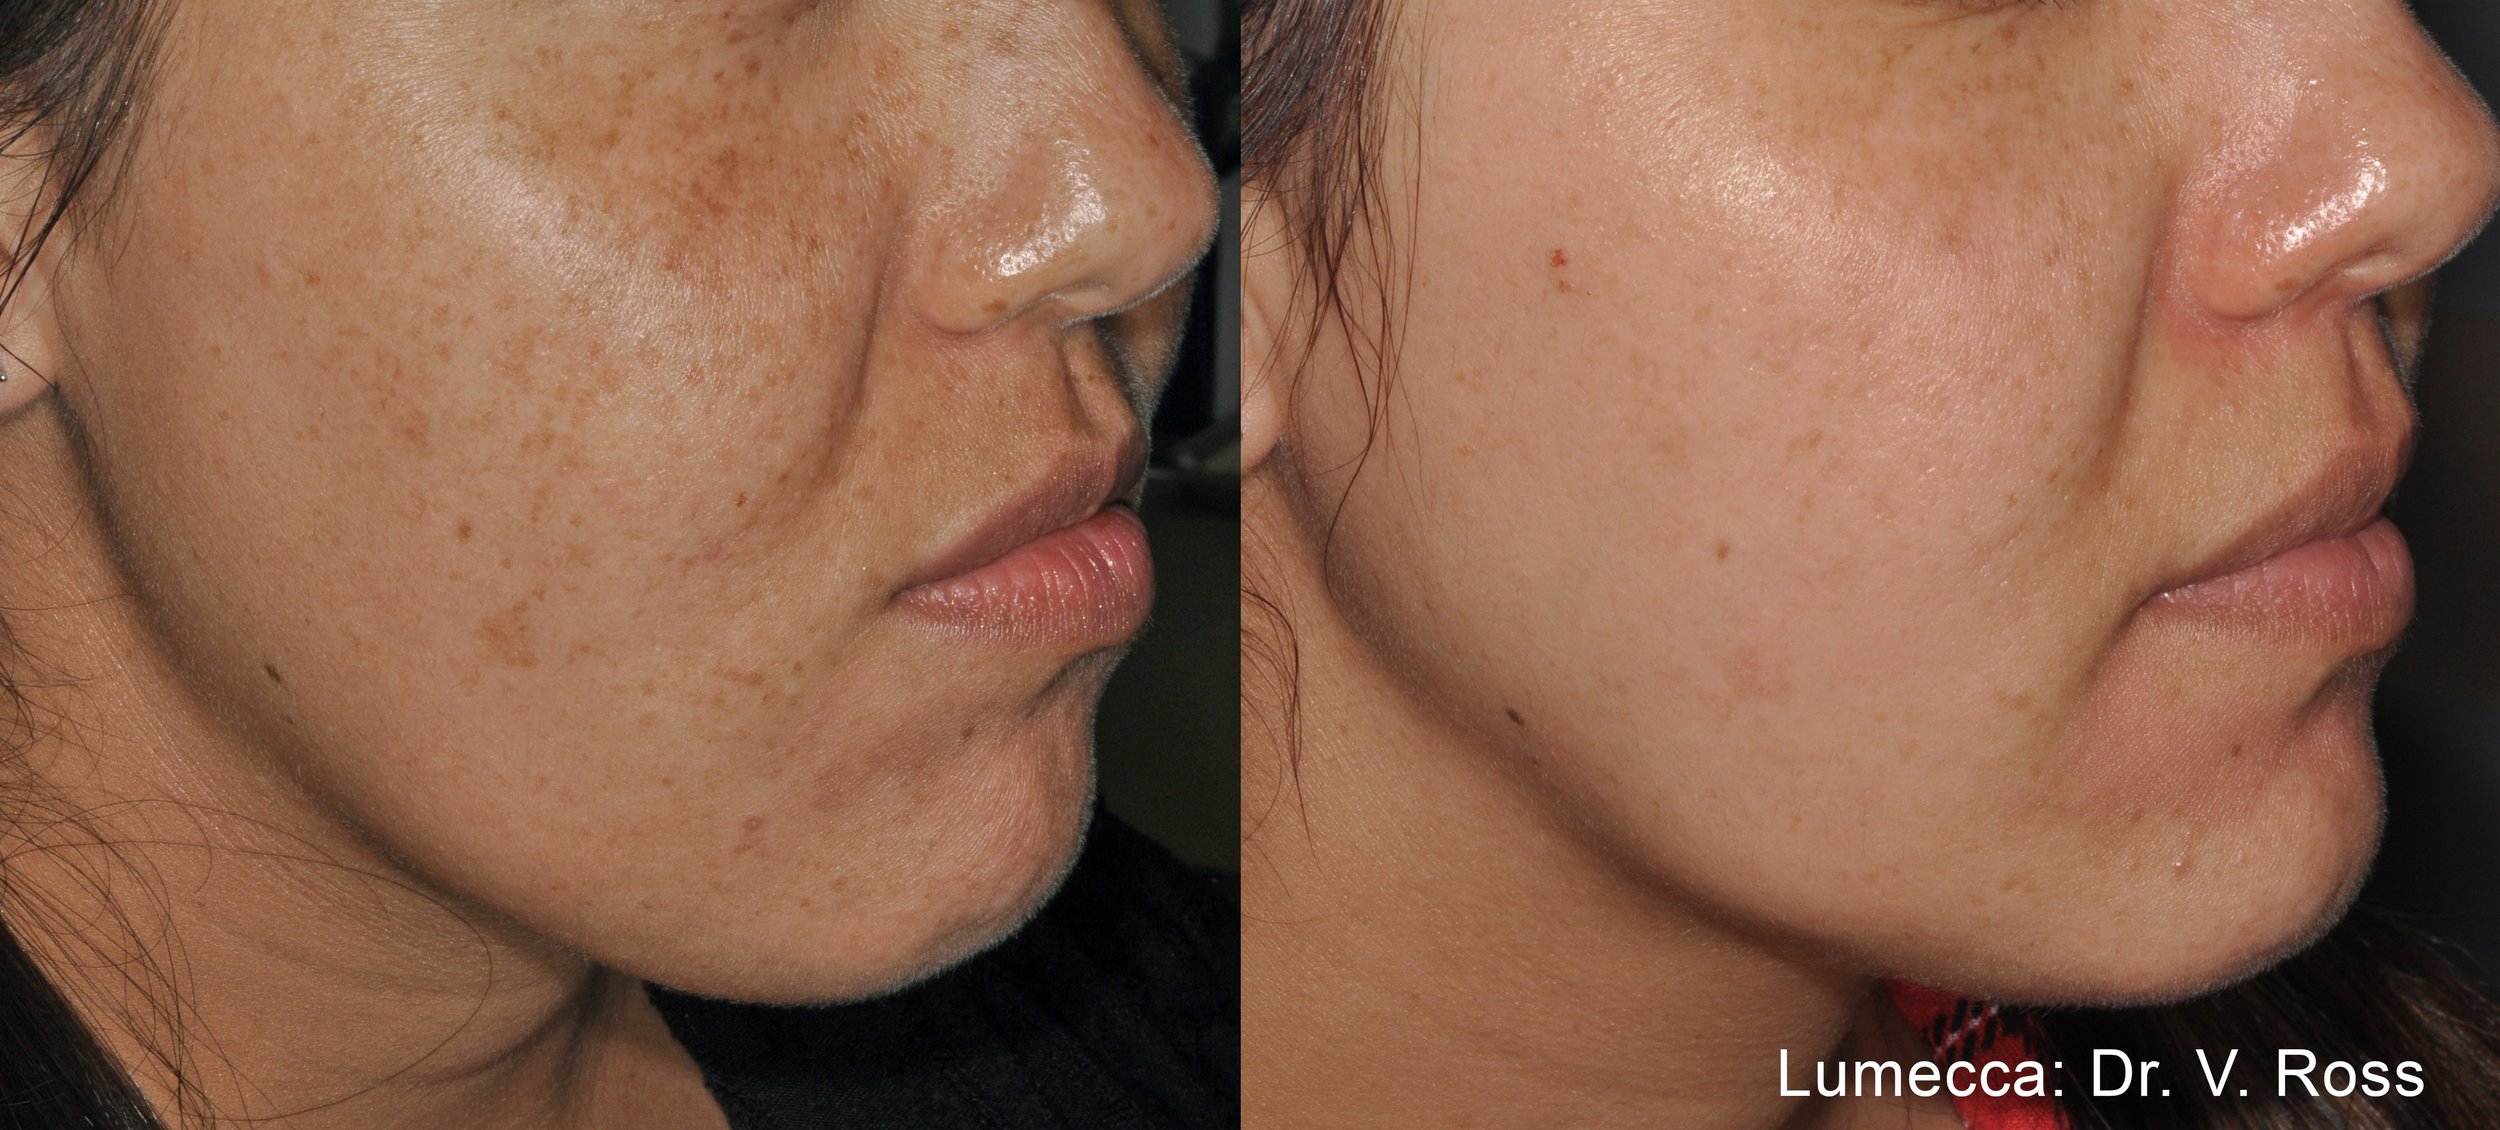 Before and after IPL Photofacial with Lumecca cheeks face